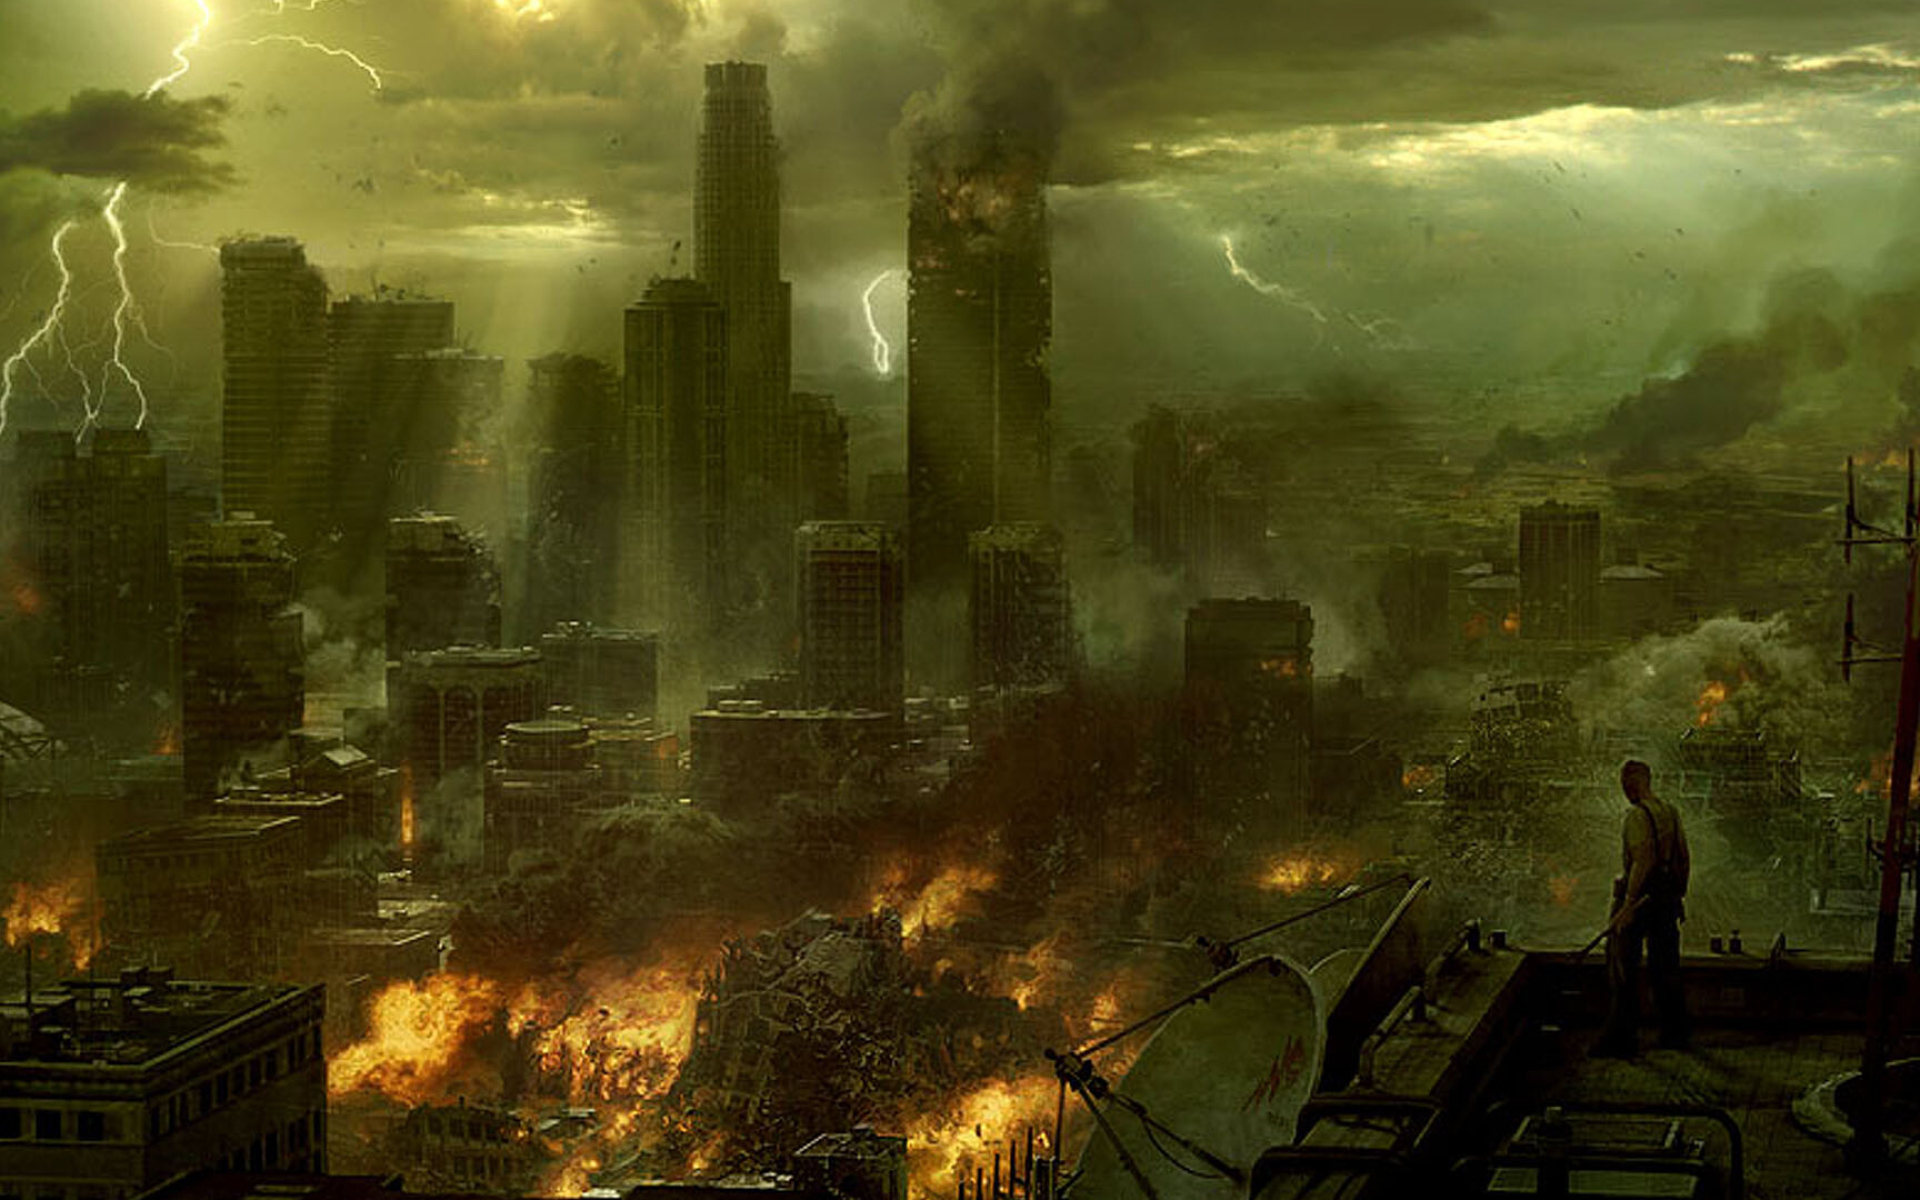 Post-apocalypse: Earth's civilization is collapsing, World-wide disaster. 1920x1200 HD Wallpaper.